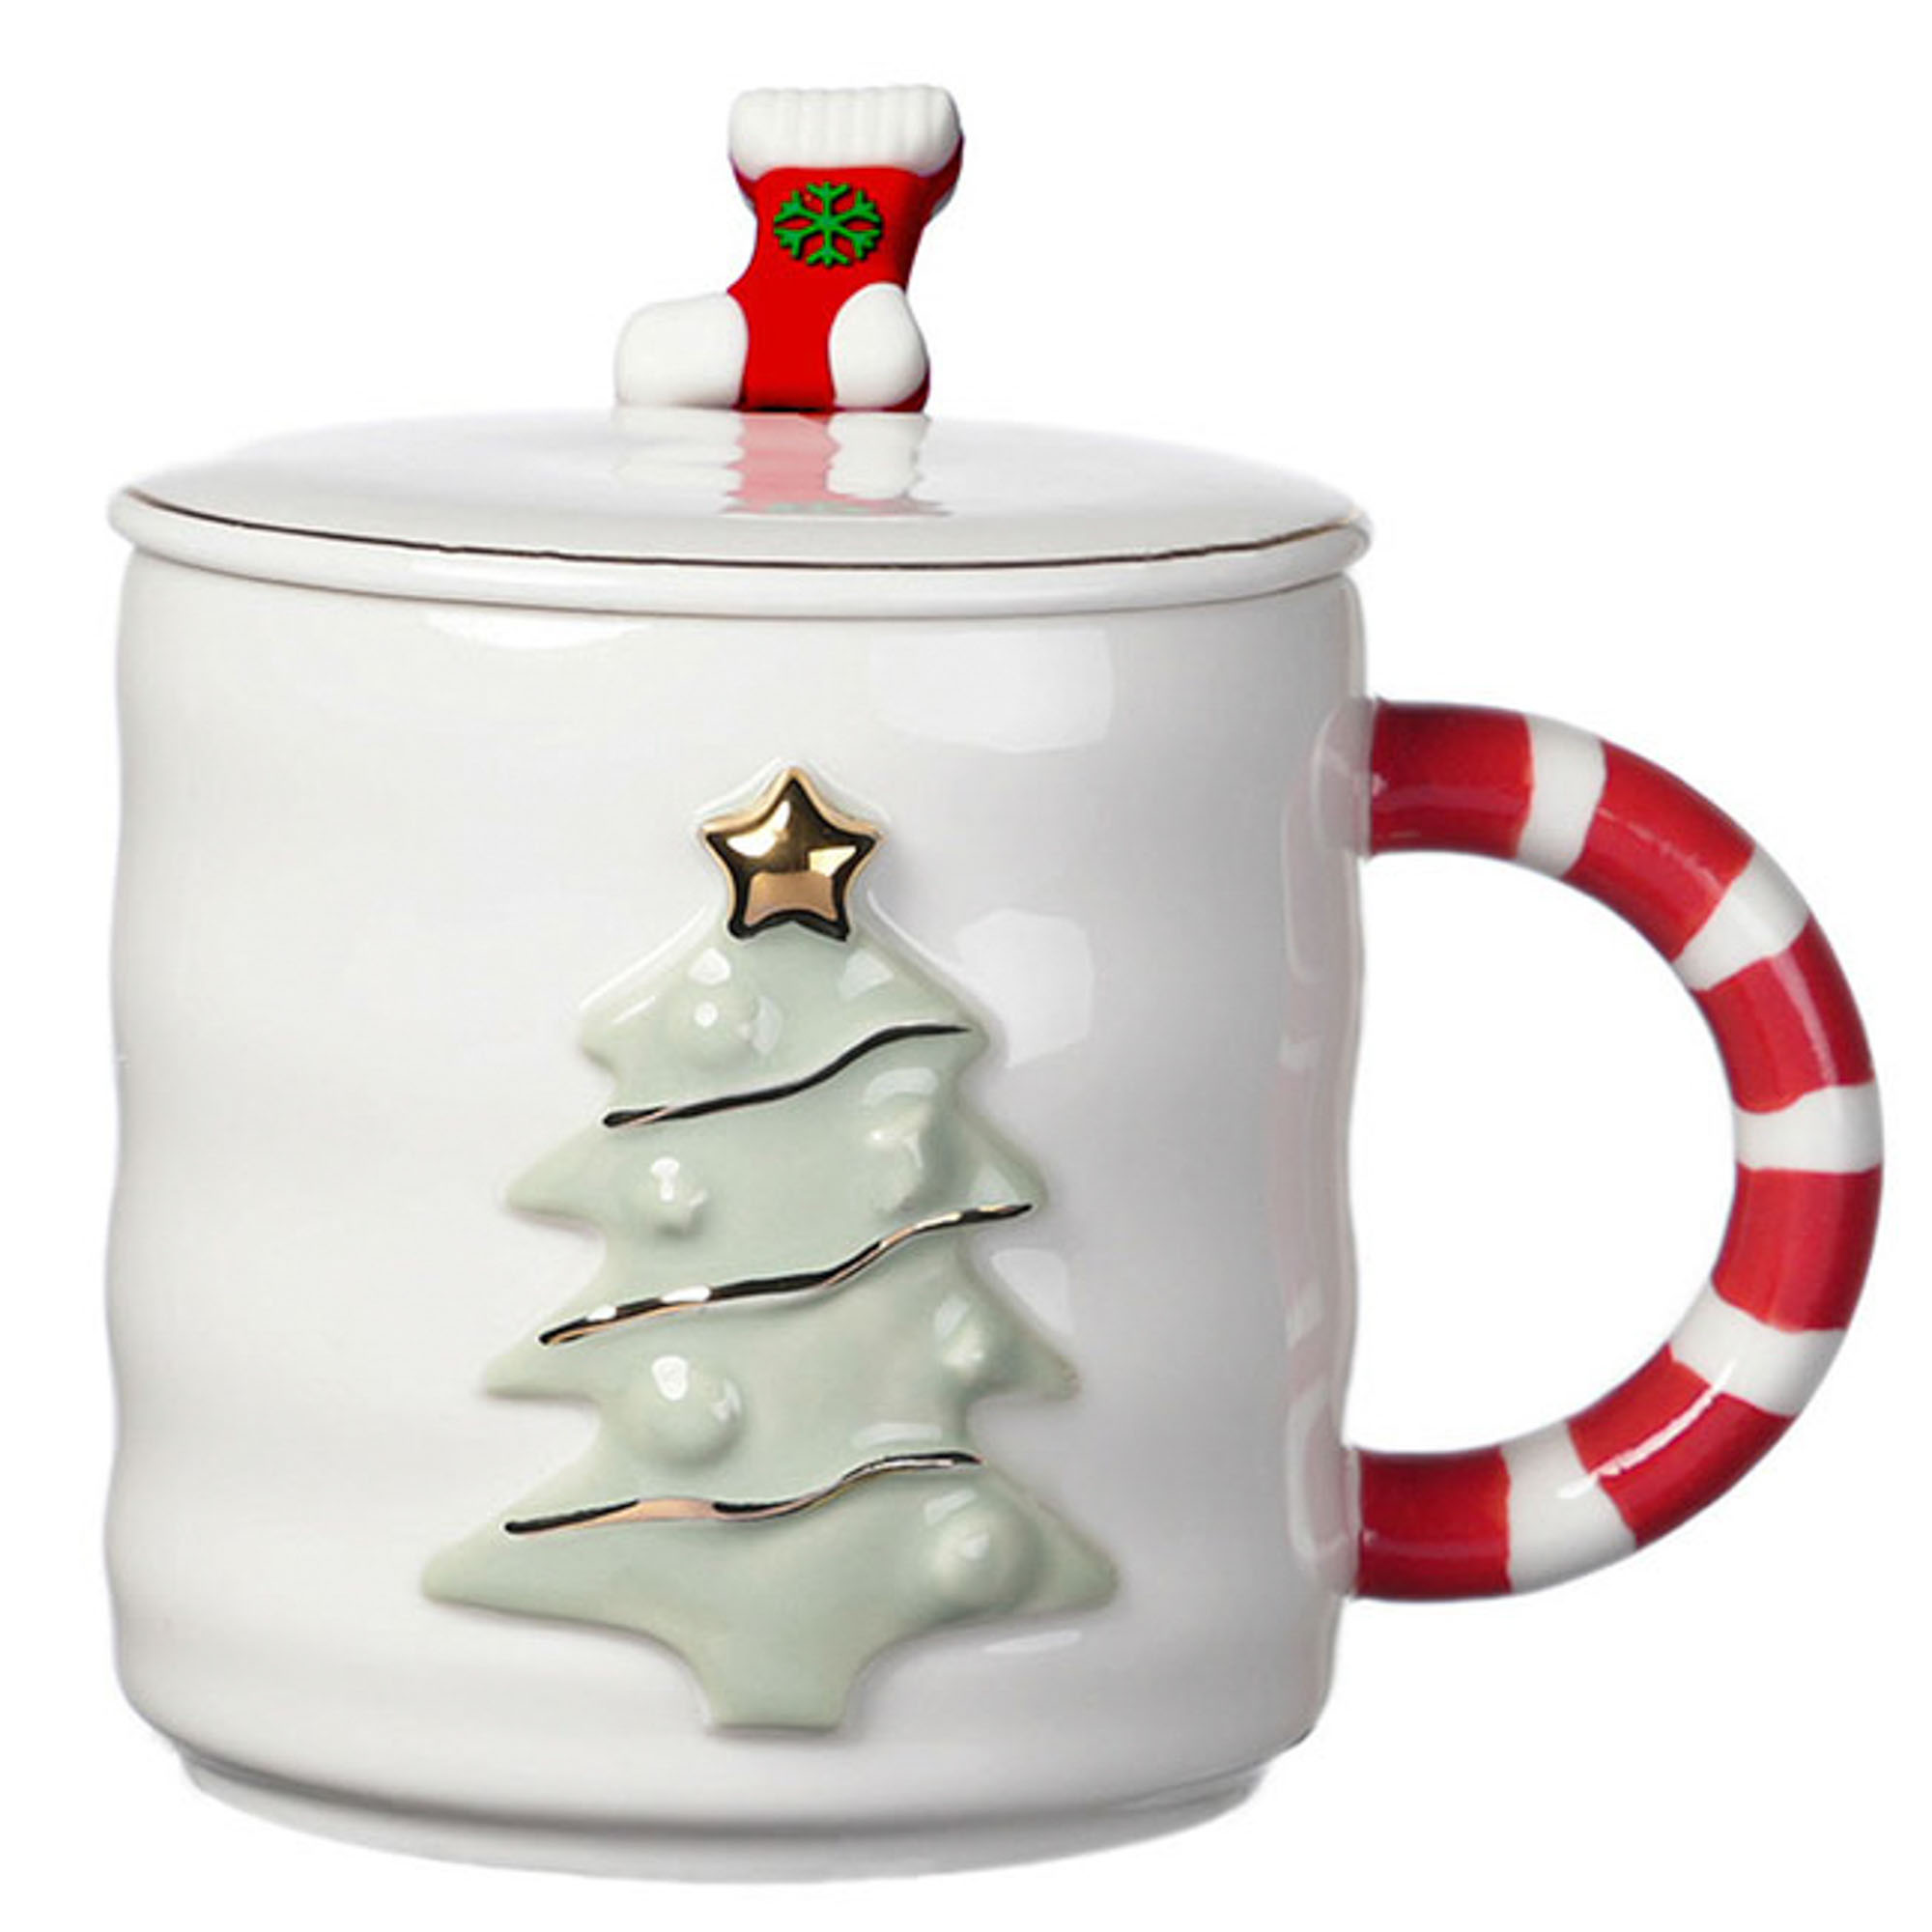 CHRISTMAS GIFT CUP CREATIVE TREND MUG WITH LID SPOON LARGE CAPACITY CERAMIC COFFEE CUP FOR CHILDREN COUPLE CHRISTMAS GIFTS